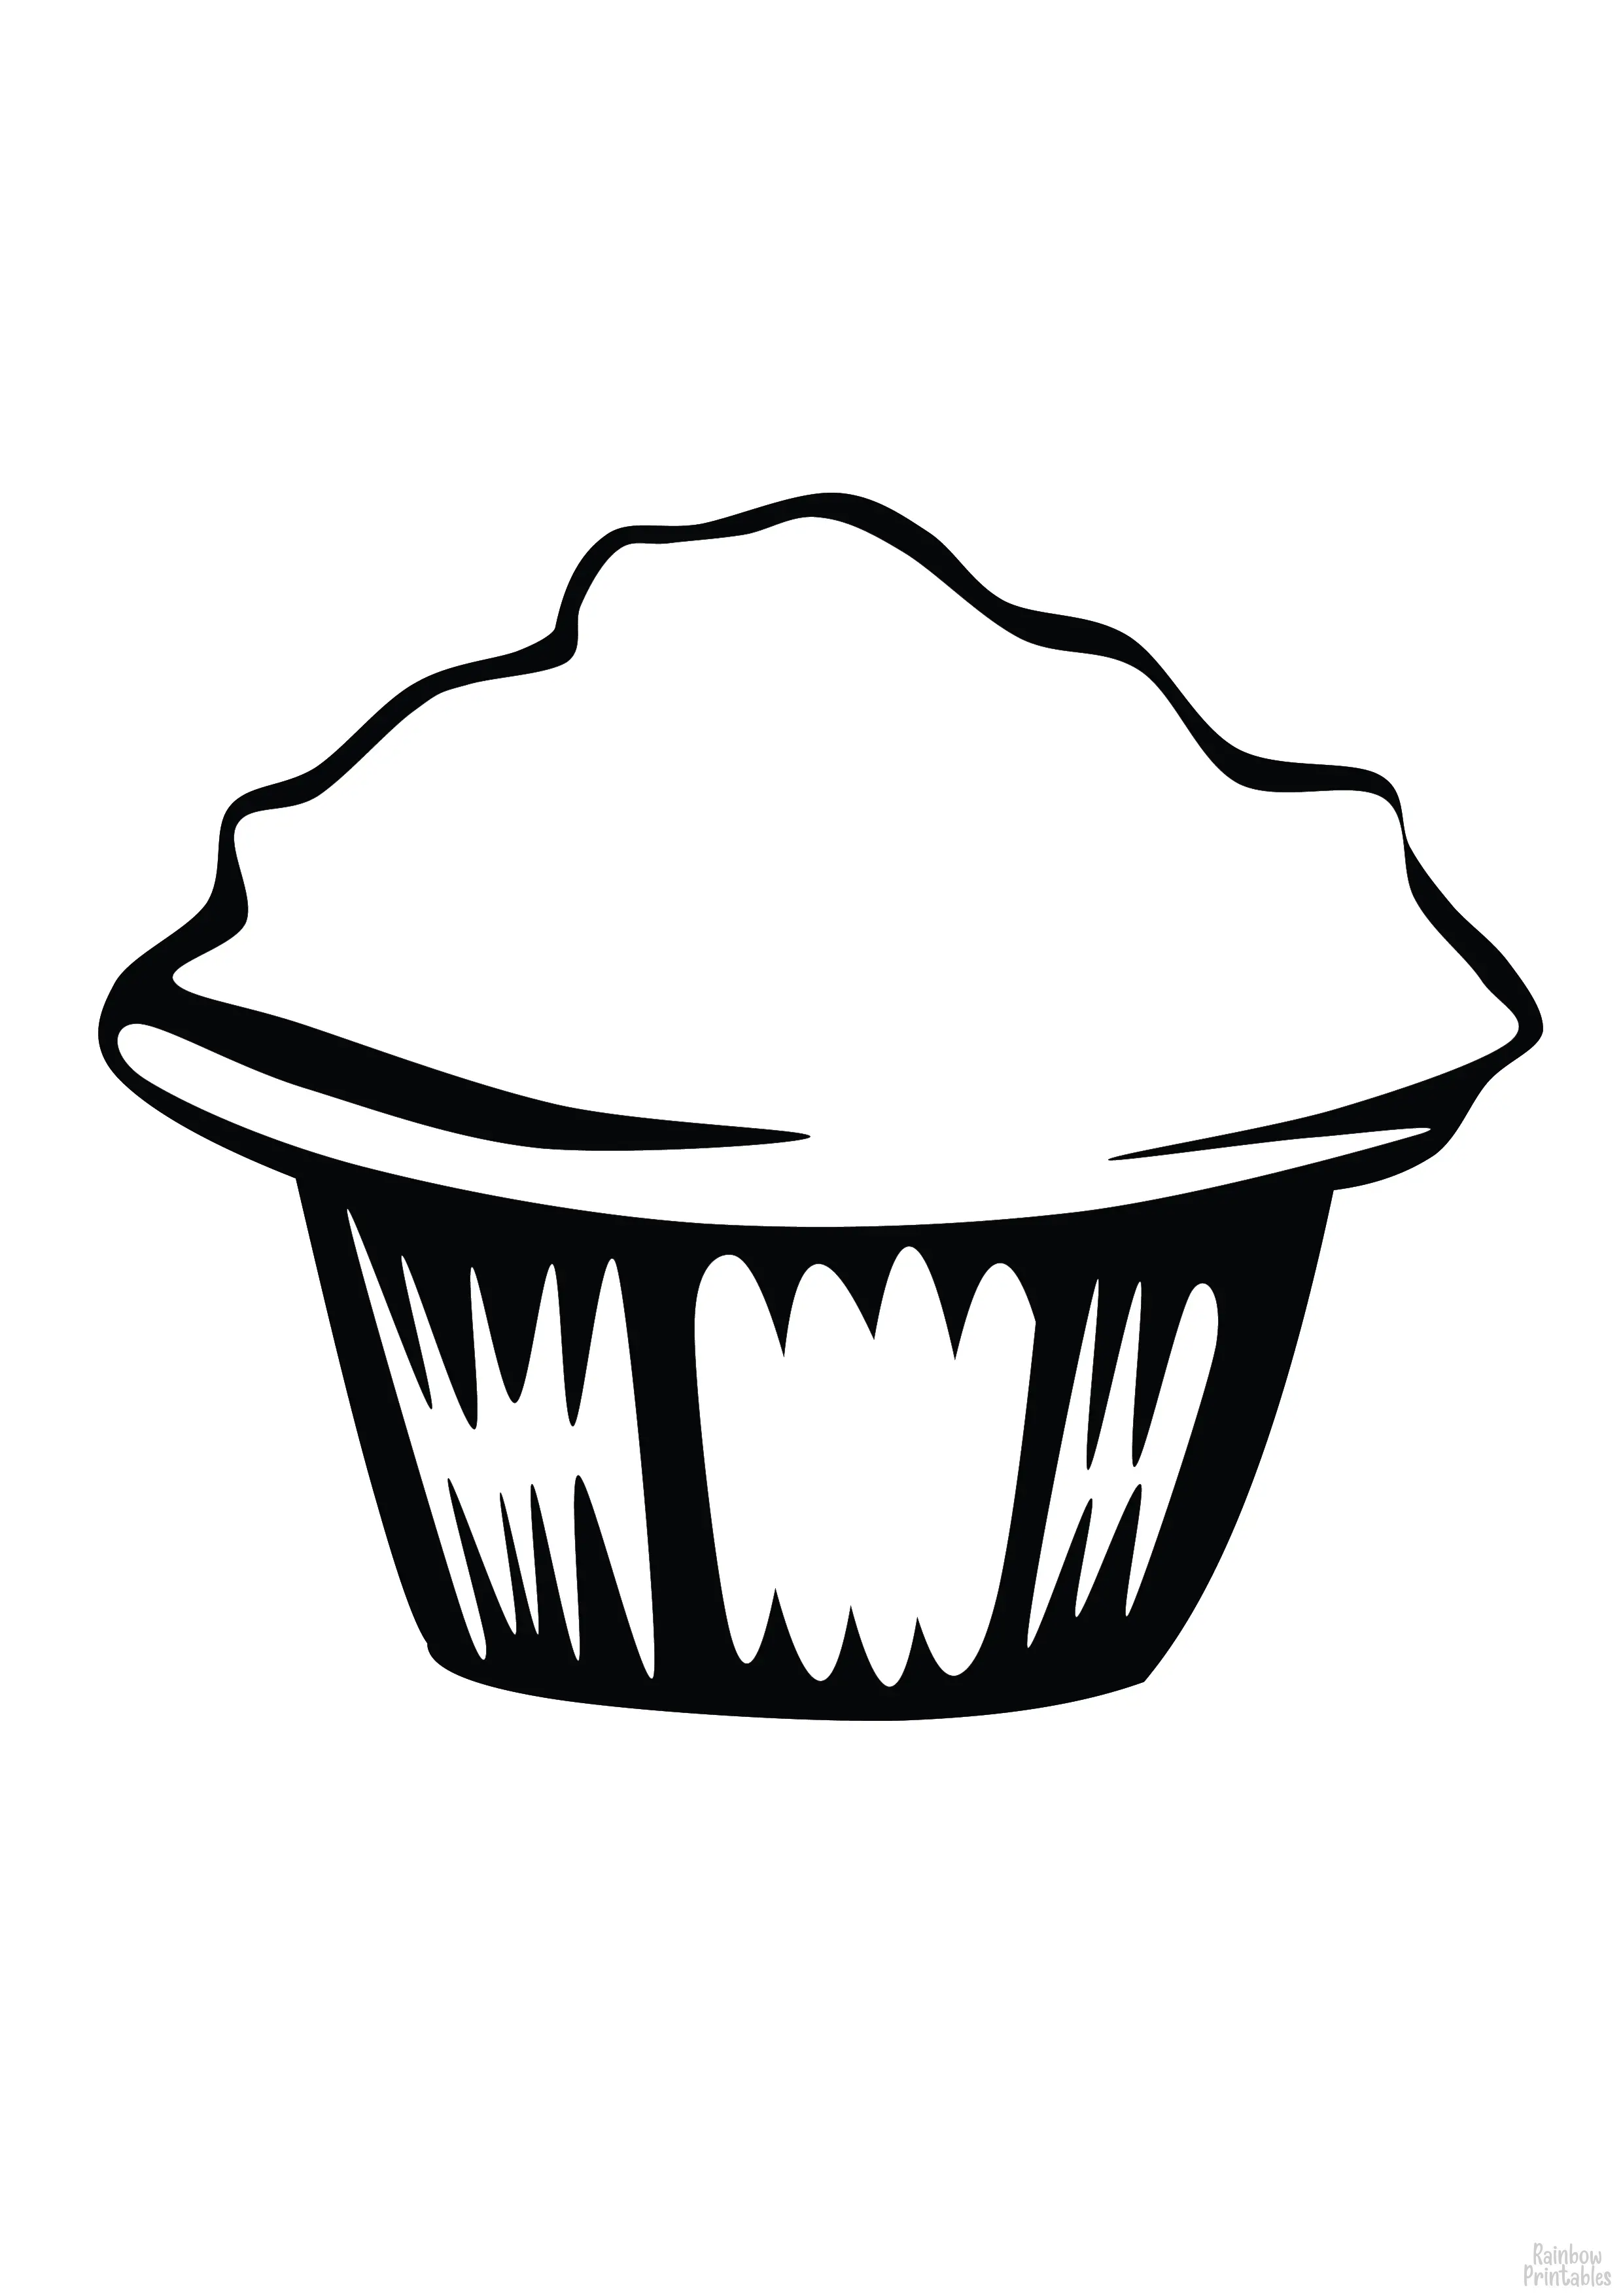 Muffin Tea time Food Clipart Coloring Pages Line Art Drawings for Kids-01